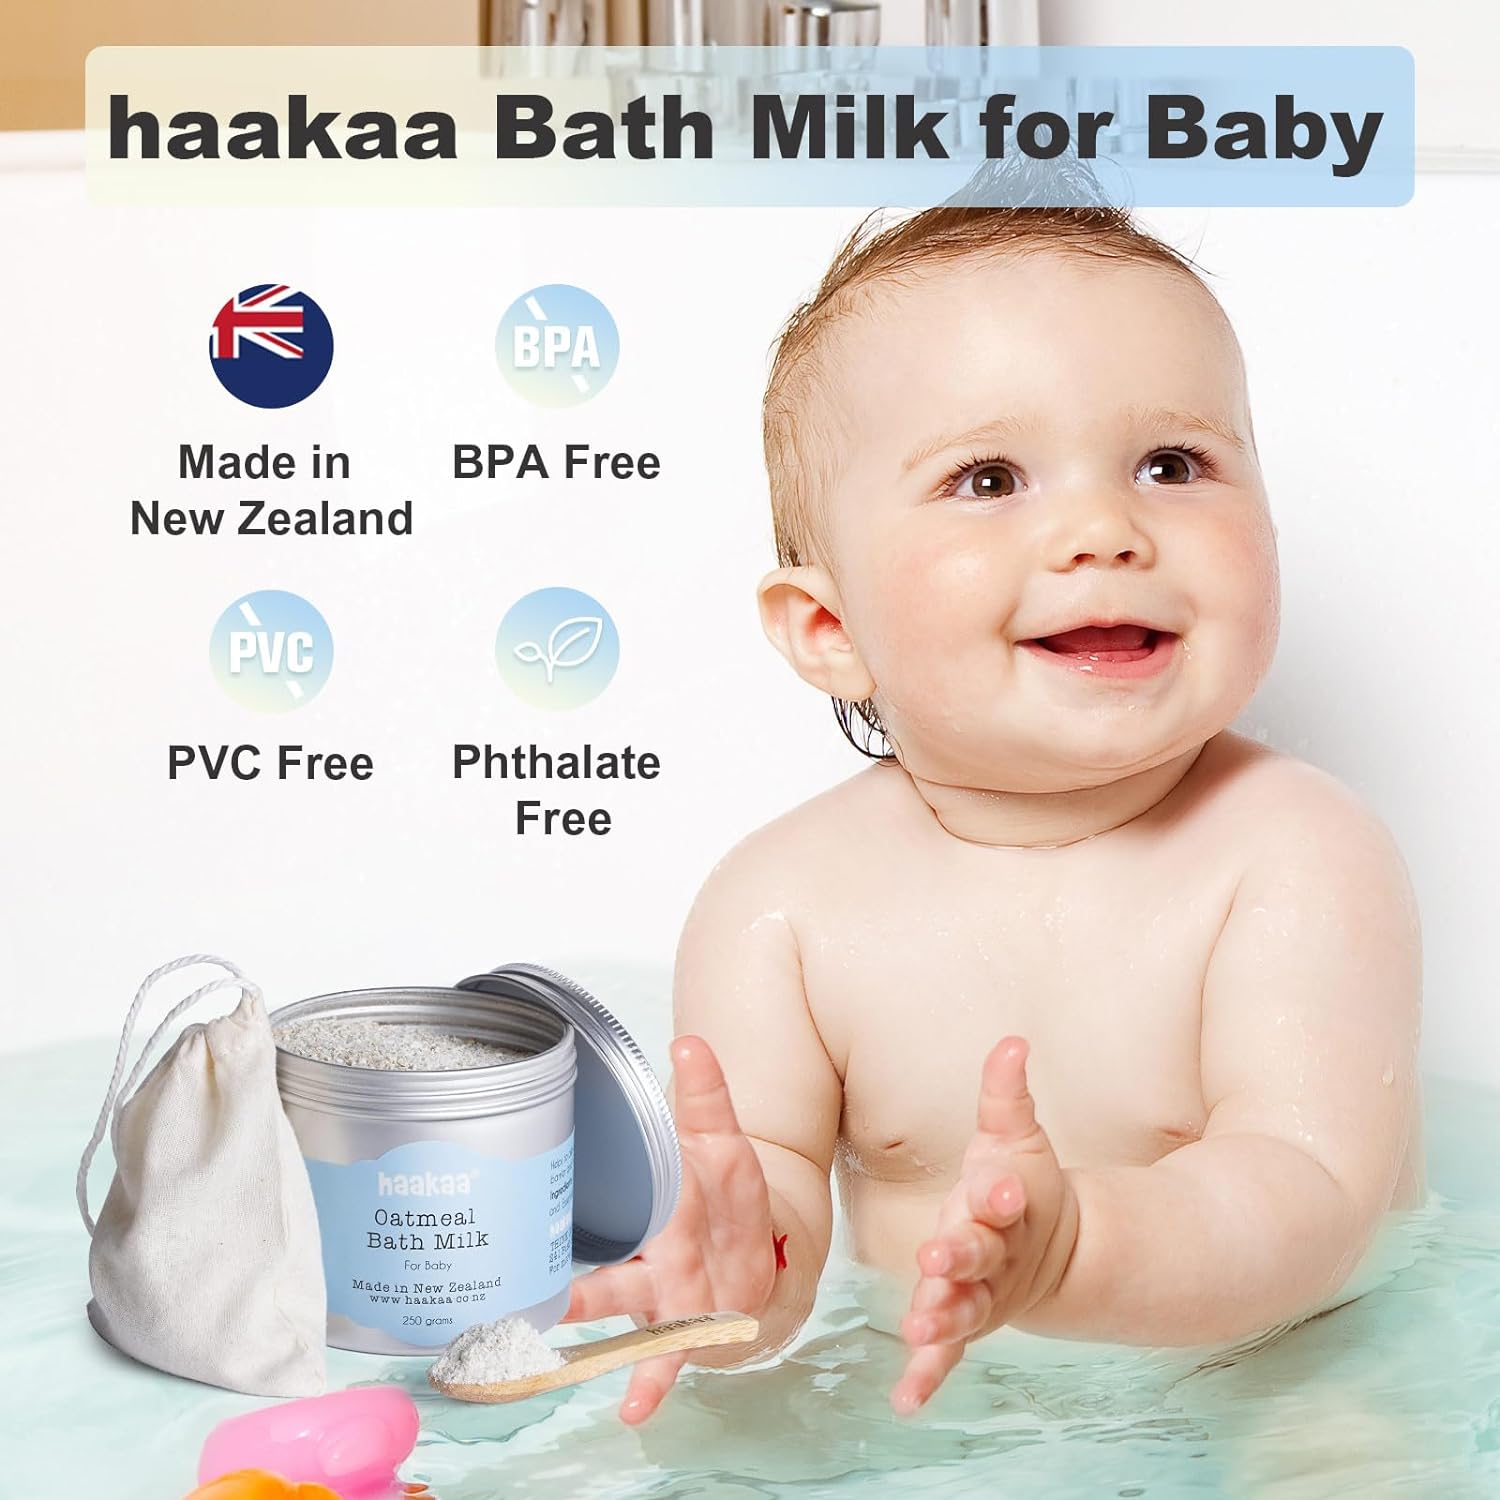 haakaa Oatmeal Baby Bath Milk, Gentle for Baby, Natural Colloidal Oatmeal, Hypoallergenic Bath Milk for Baby's Sensitive Skin, Made in New Zealand 250g : Beauty & Personal Care